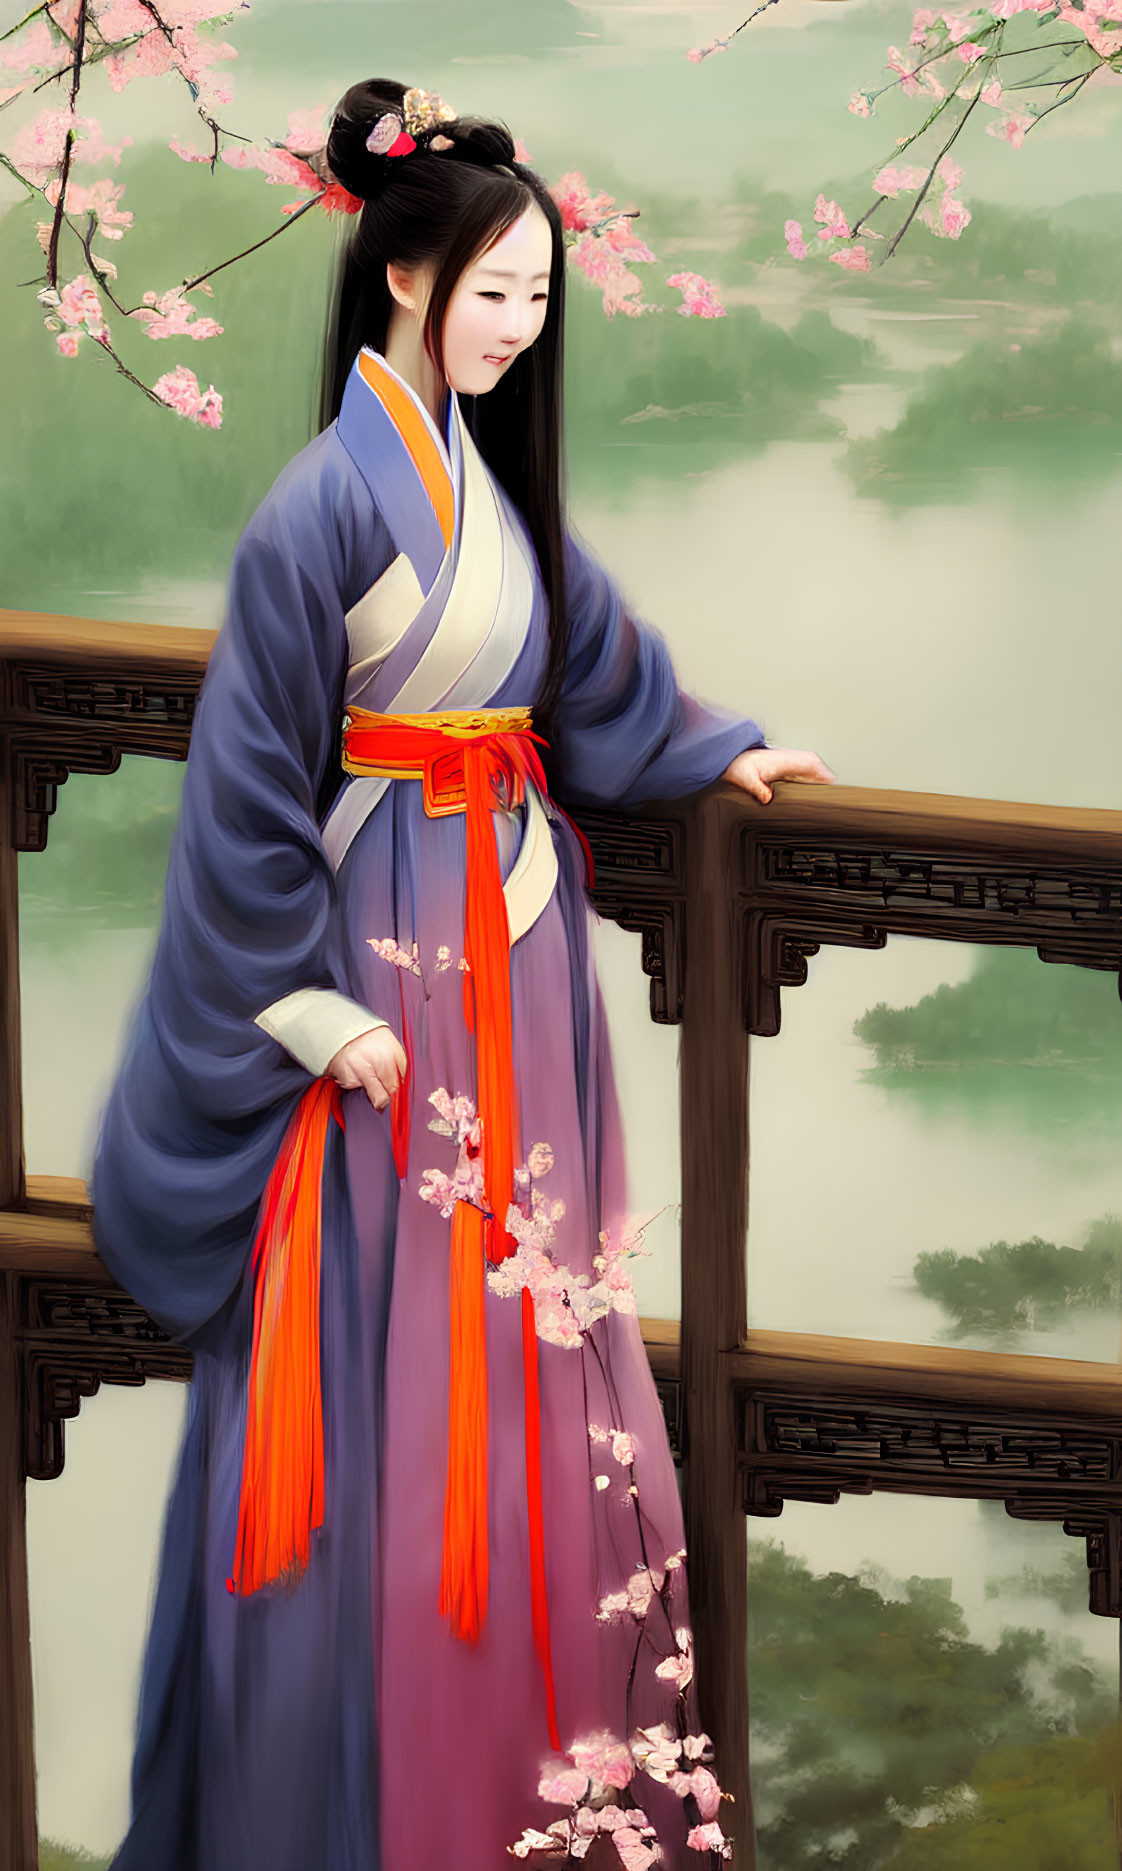 Traditional Asian attire woman on balcony with cherry blossoms